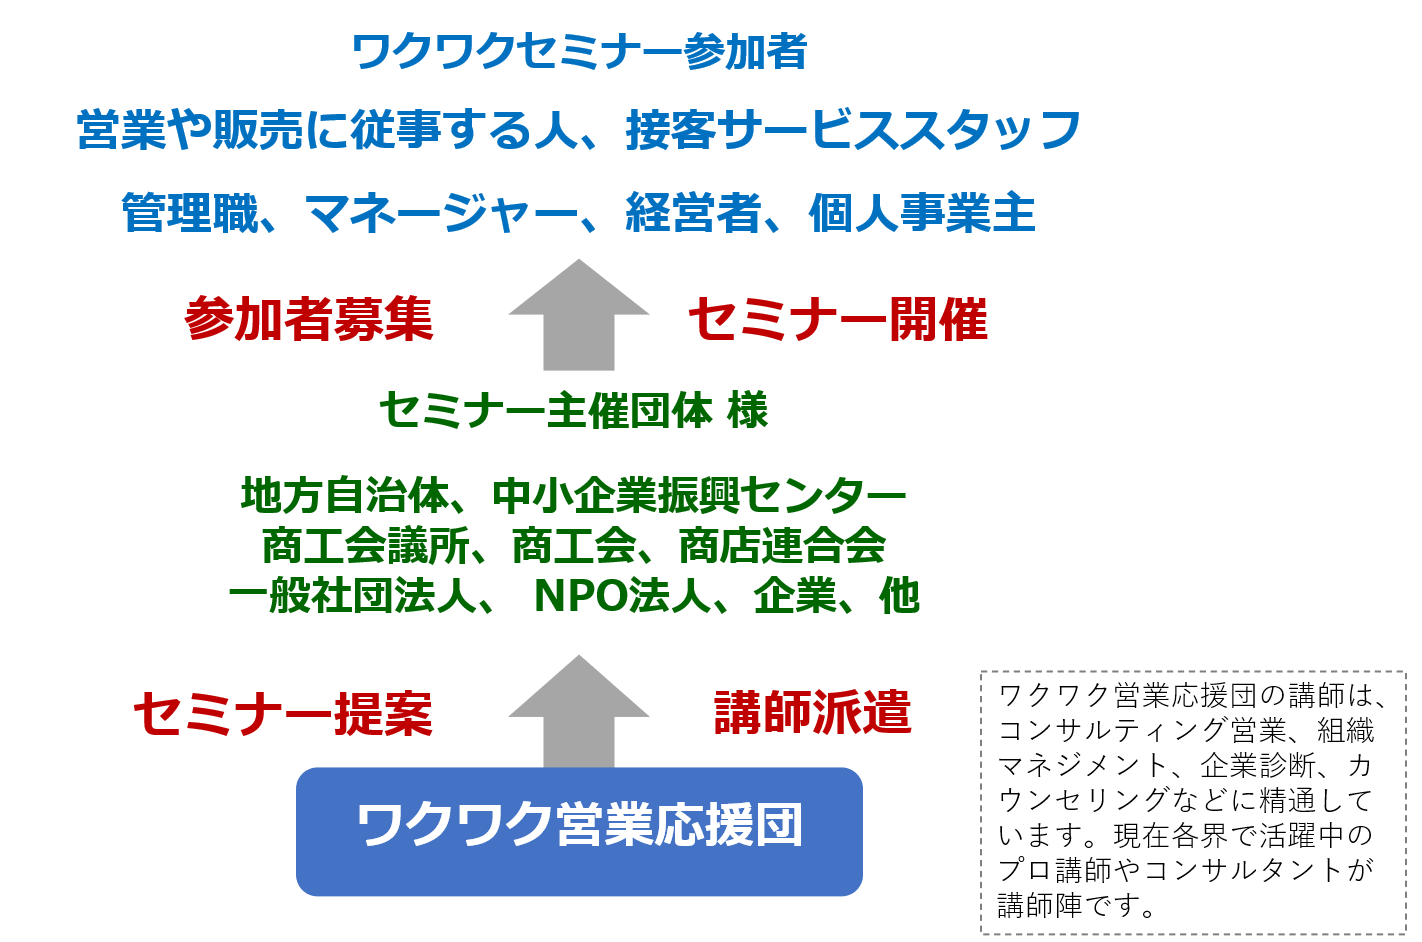 NPO法人ワクワク営業応援団活動概要